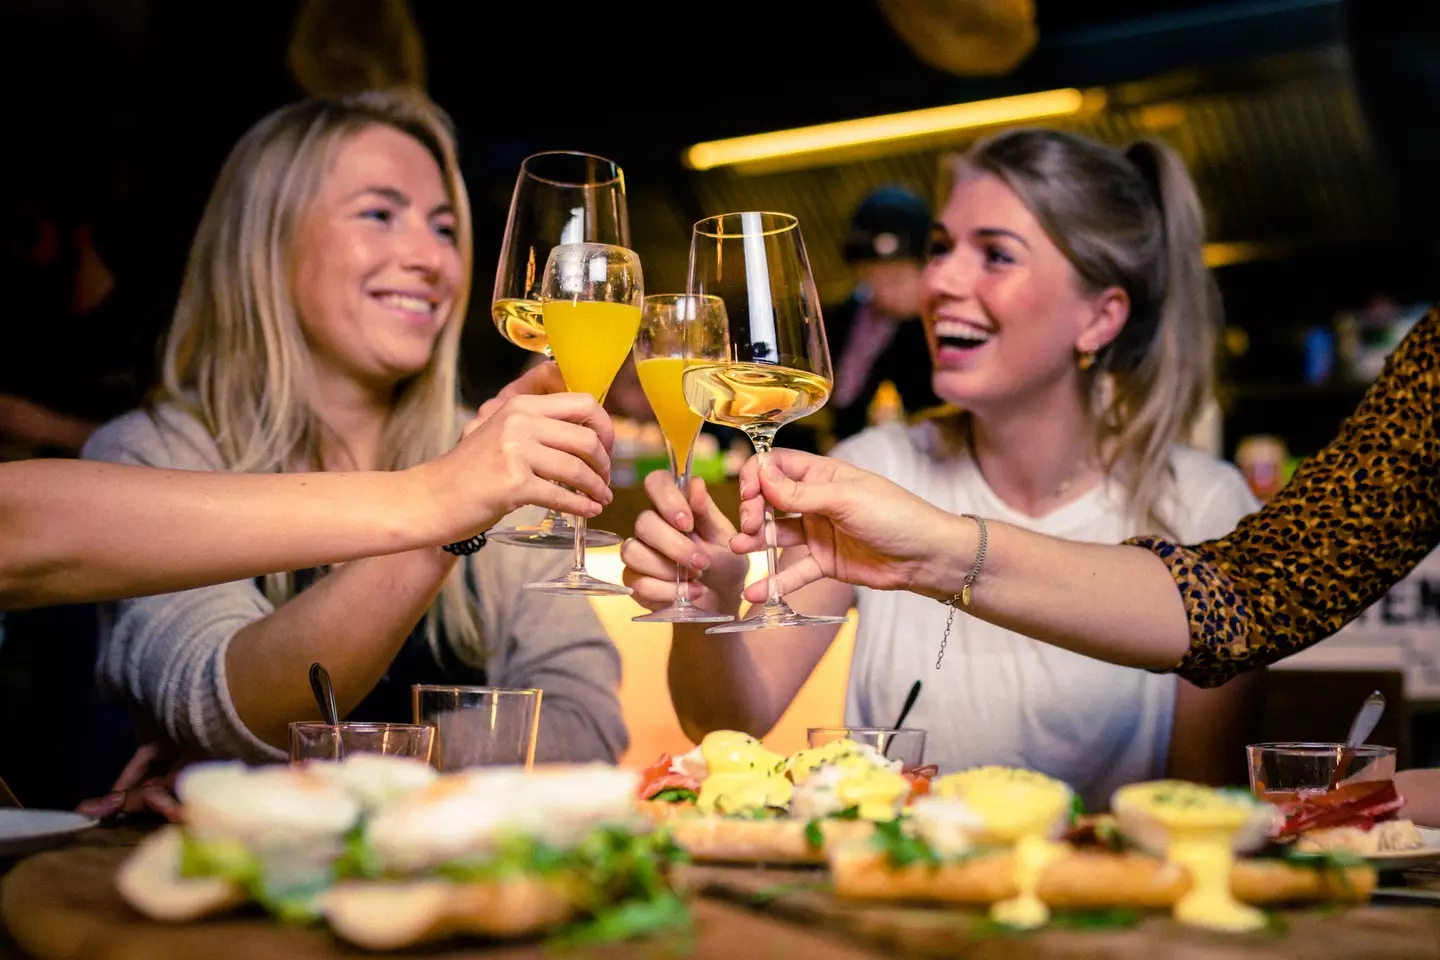 Bath based hen party organisers, GoHen, are looking for a bottomless brunch taster.